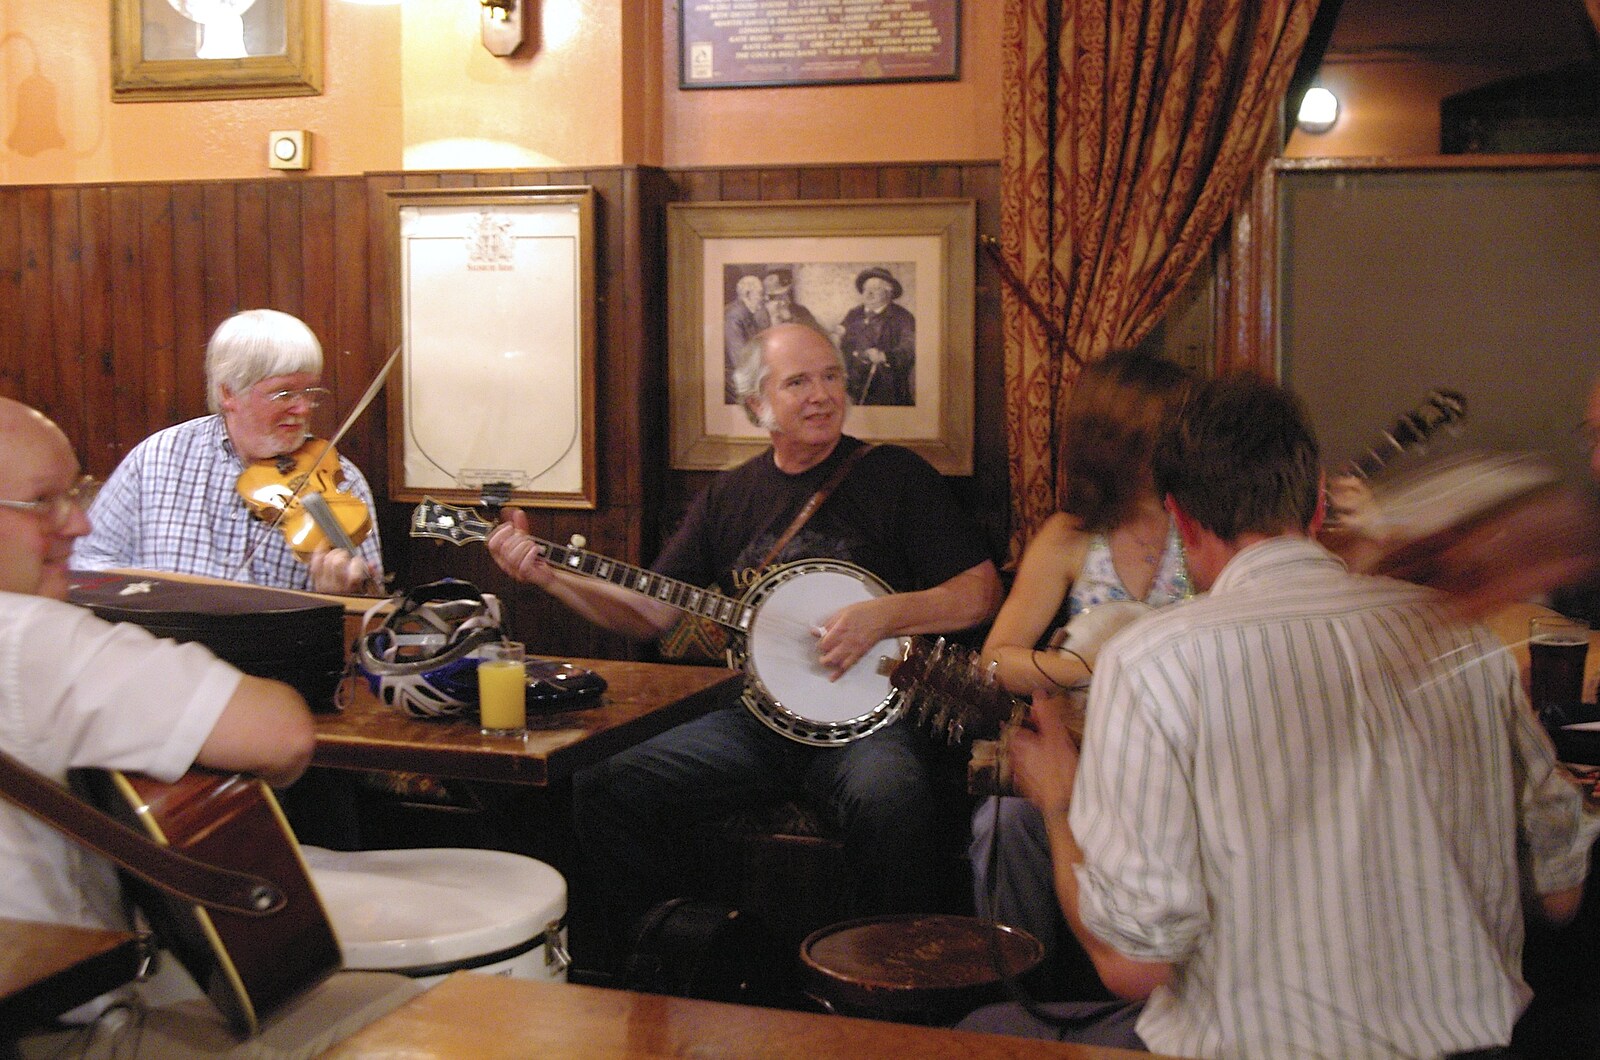 A man on a banjo from Baits Bite Lock, Folk Night at the Salisbury Arms, and Kebabs, Cambridge - 12th September 2006